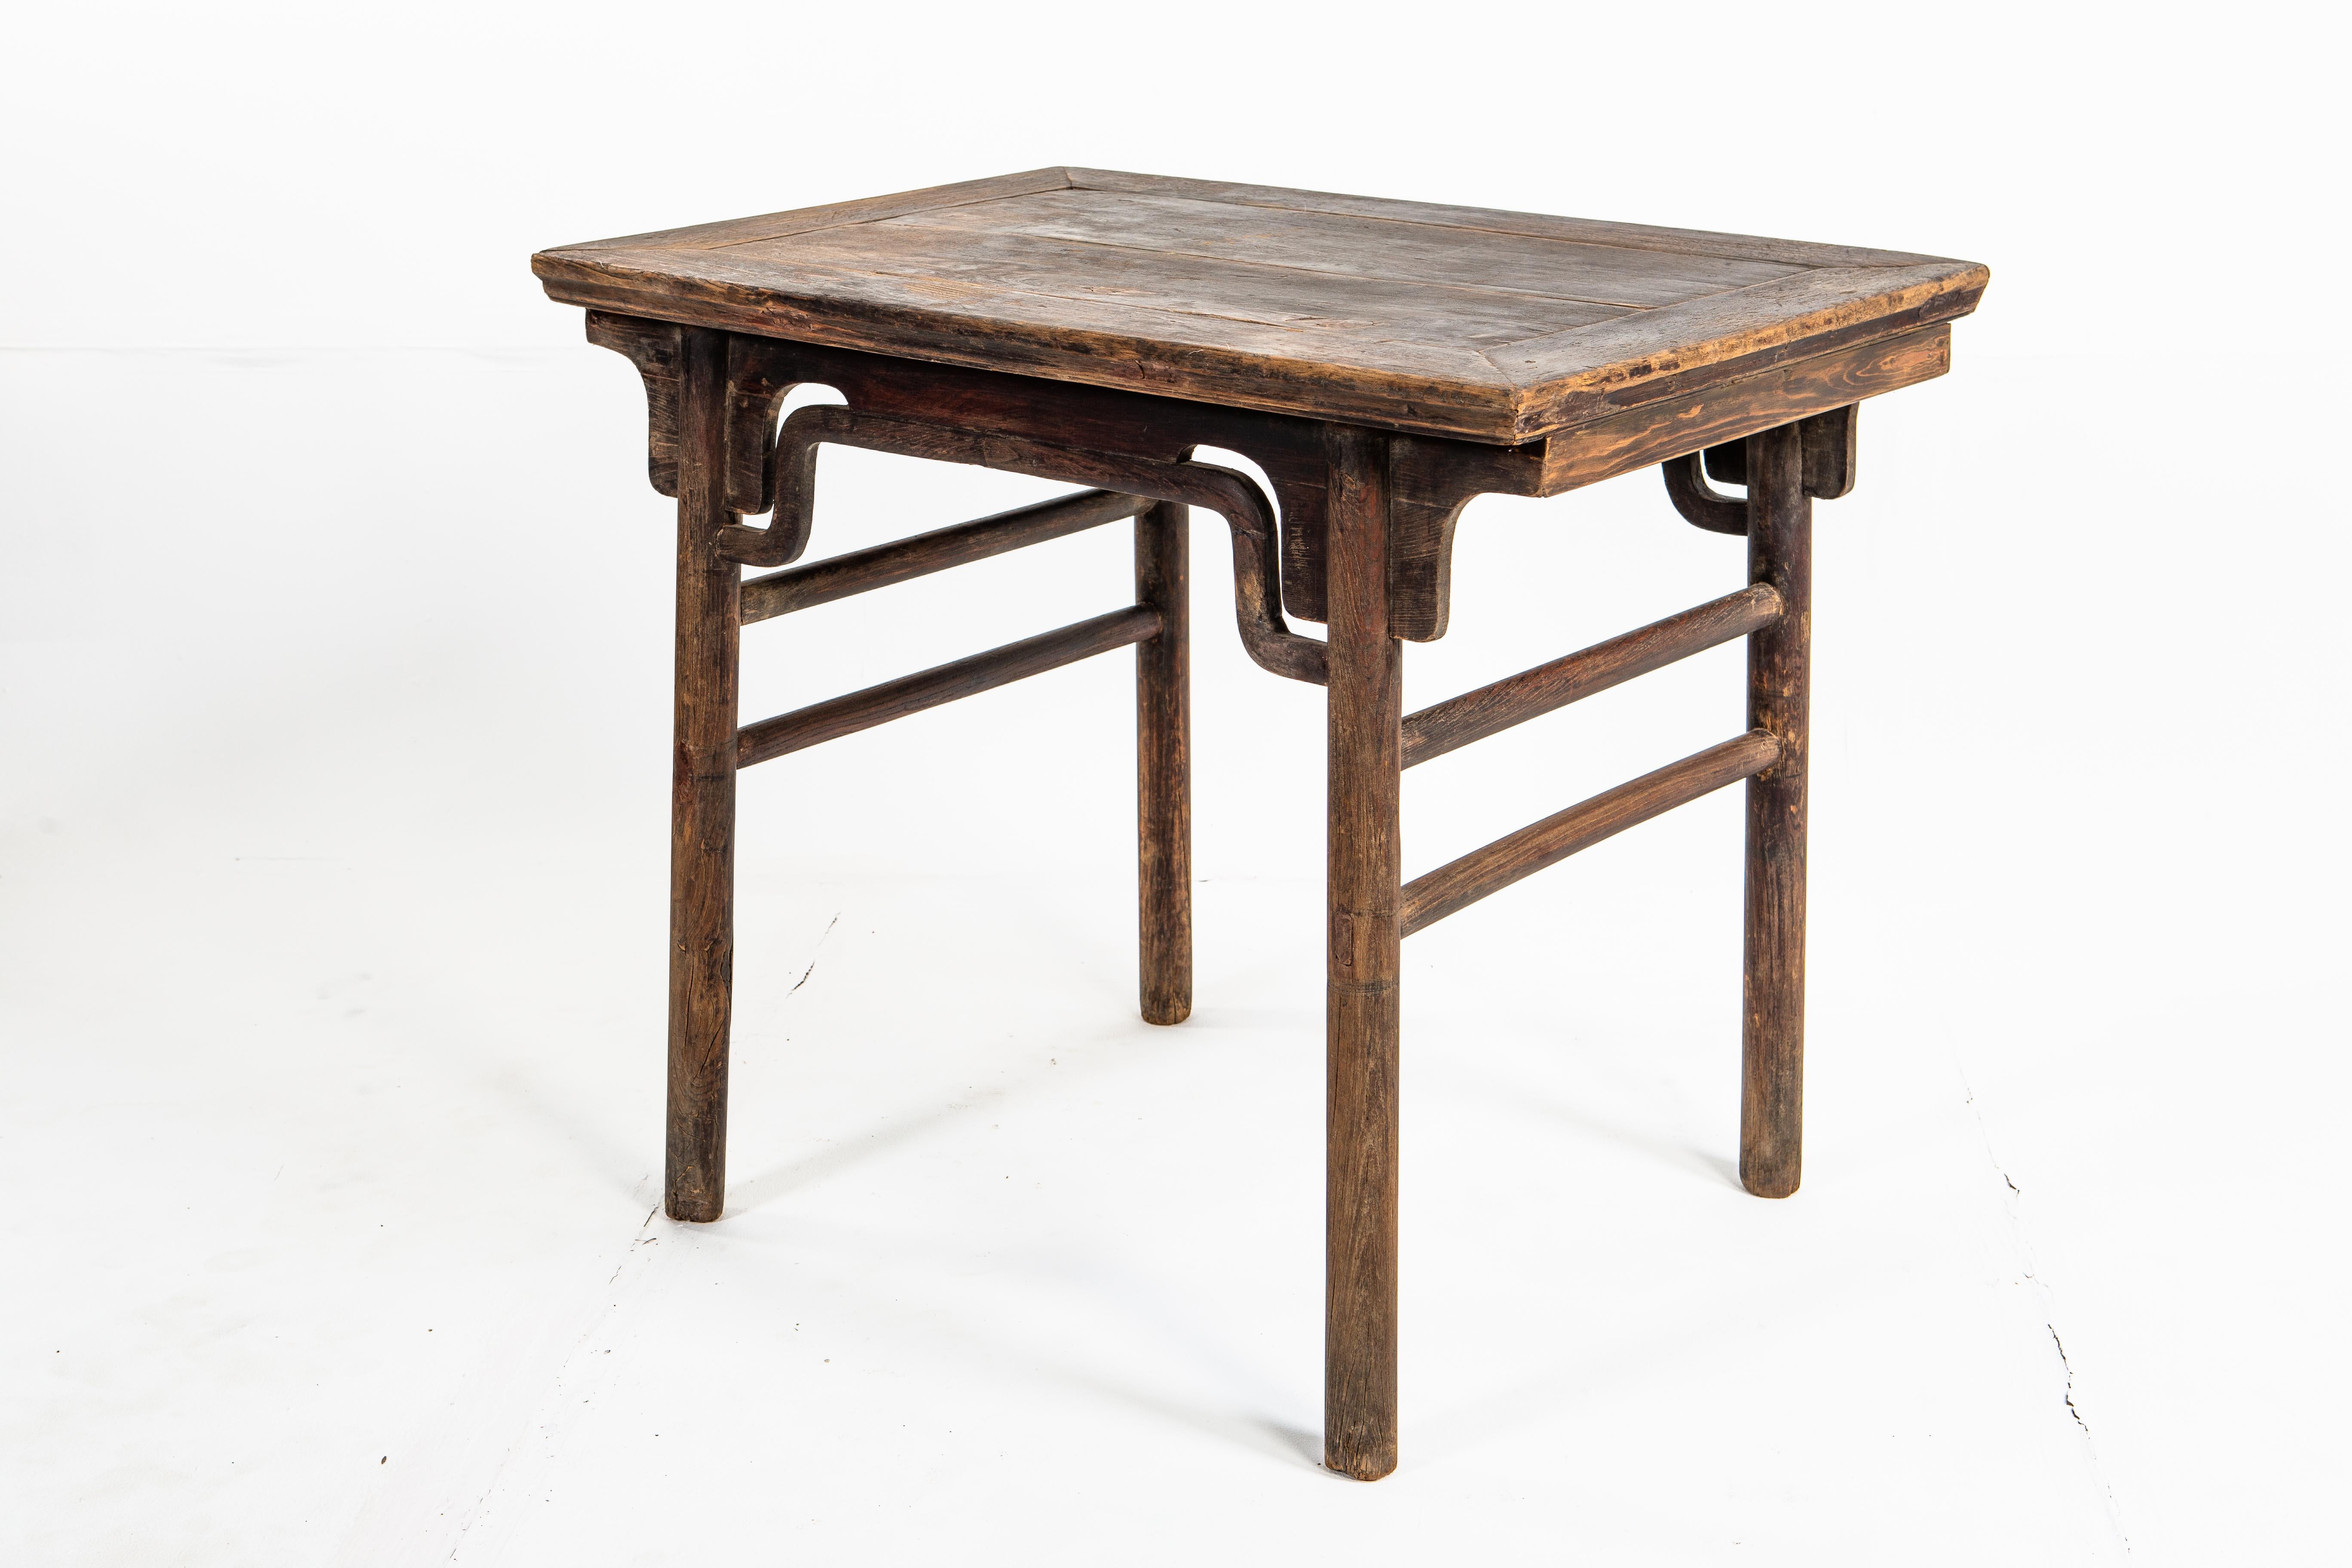 Early Qing Dynasty Painting Table (Ulmenholz)